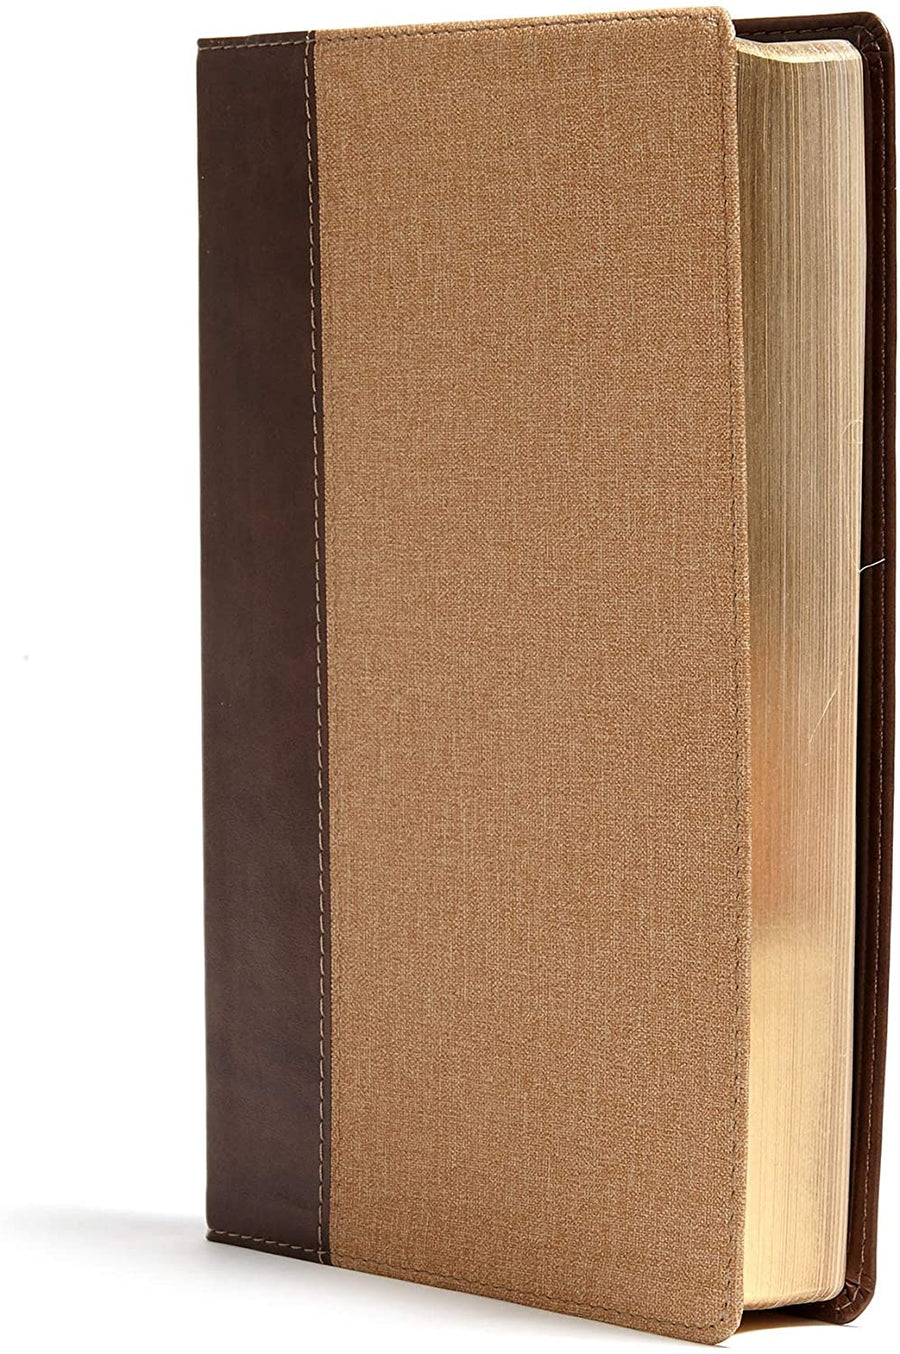 Personalized KJV Rainbow Study Bible Brown/Tan LeatherTouch Smythe Sewn Binding Color-Coded Text